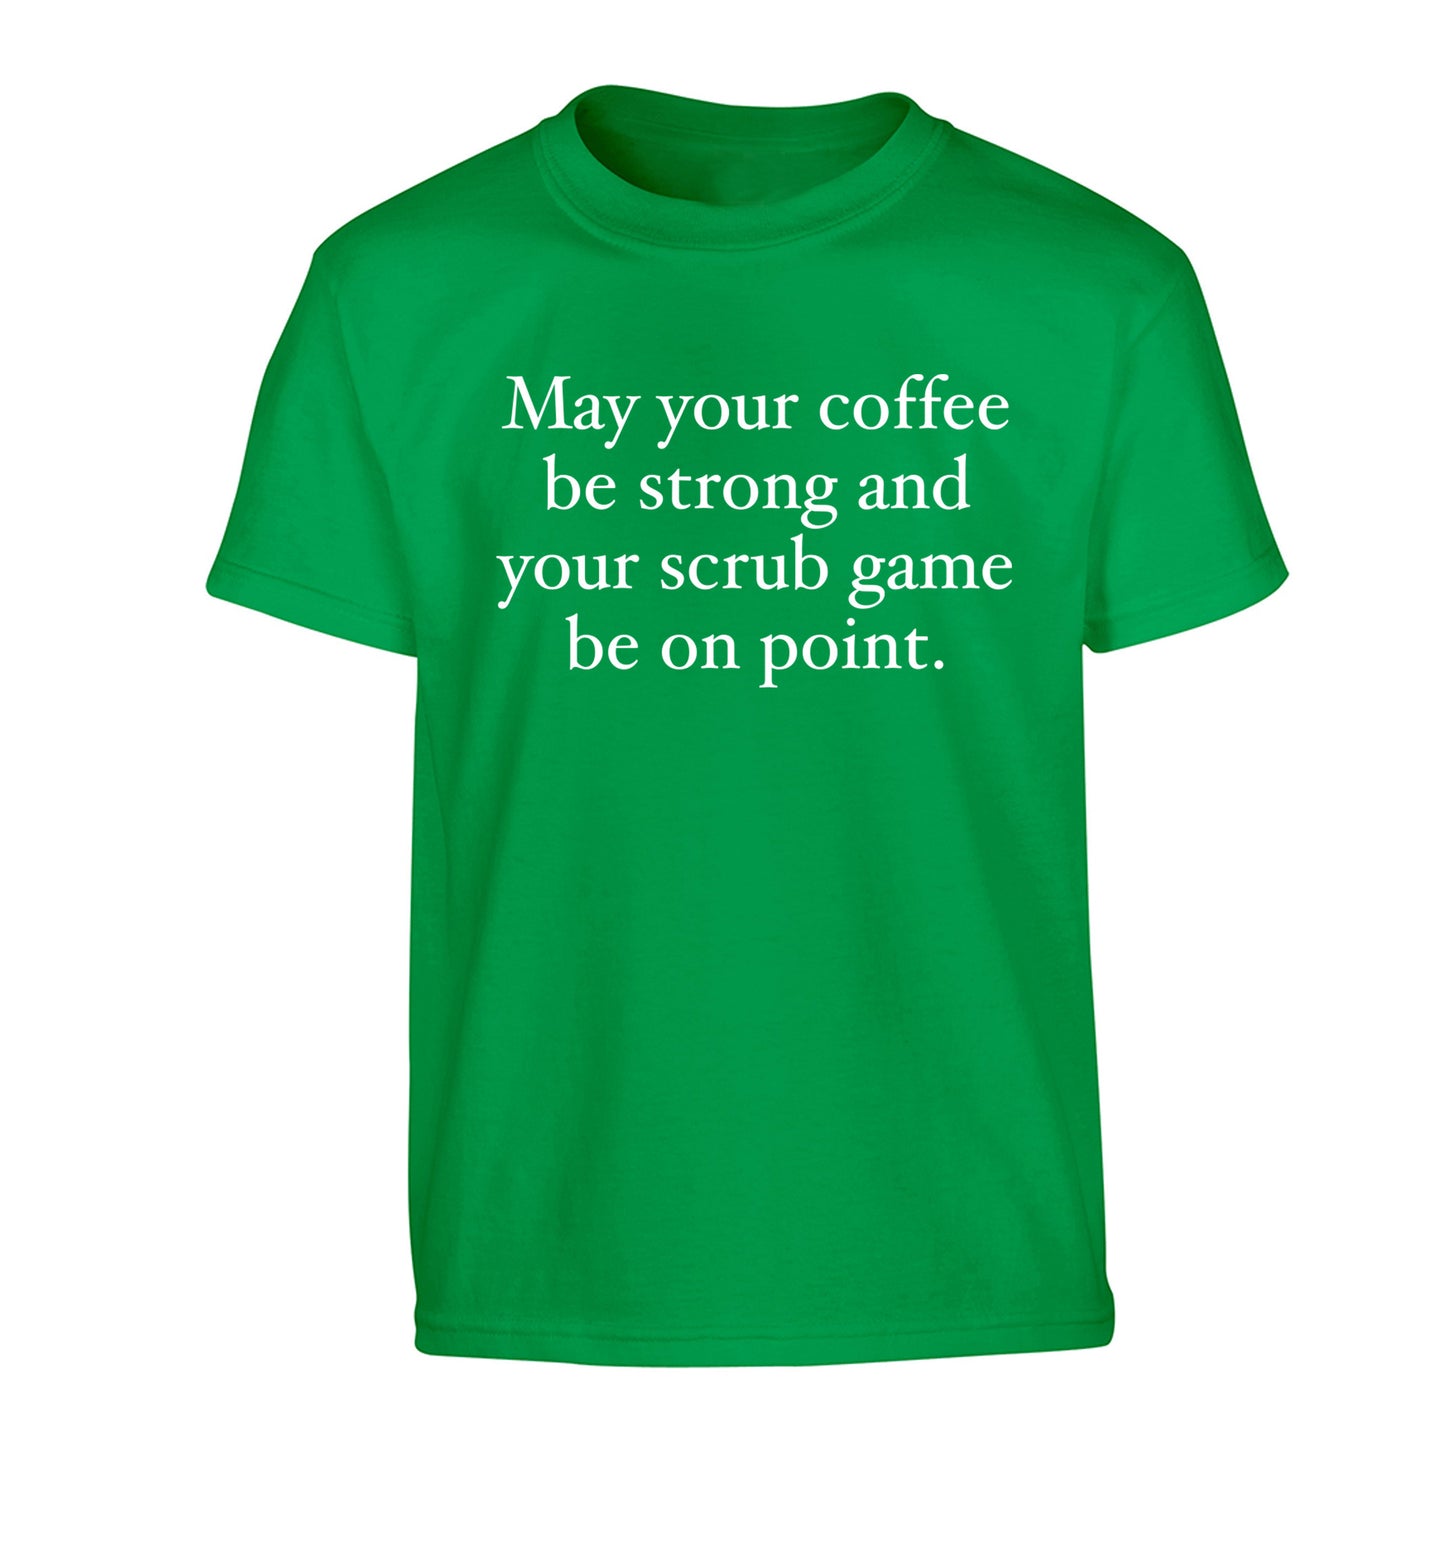 May your caffeine be strong and your scrub game be on point Children's green Tshirt 12-14 Years